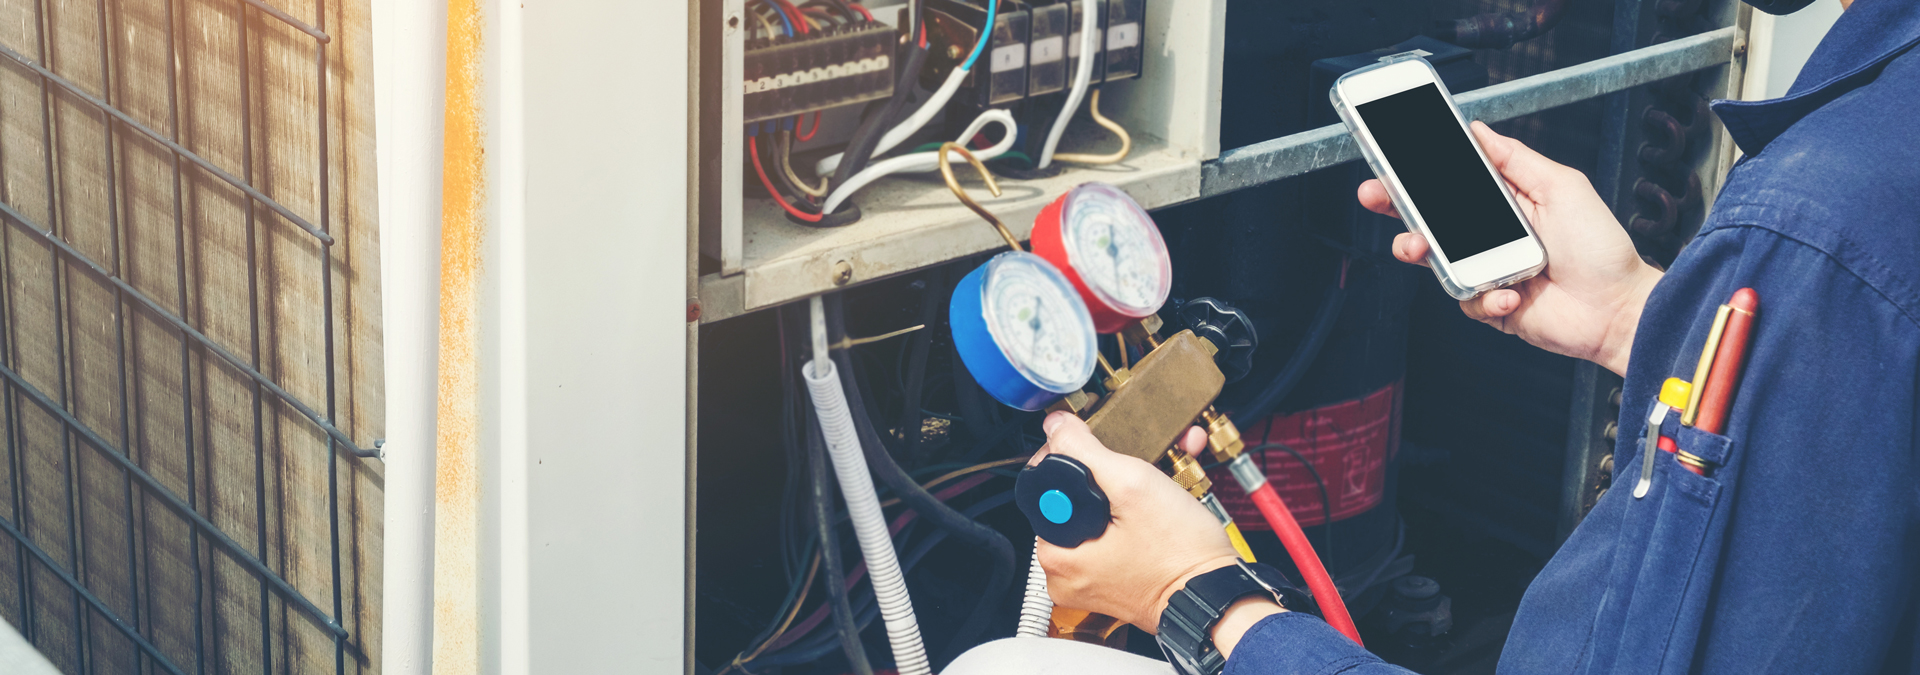 Best choice for HVAC services  Reliable HVAC repairs and services in New Jersey